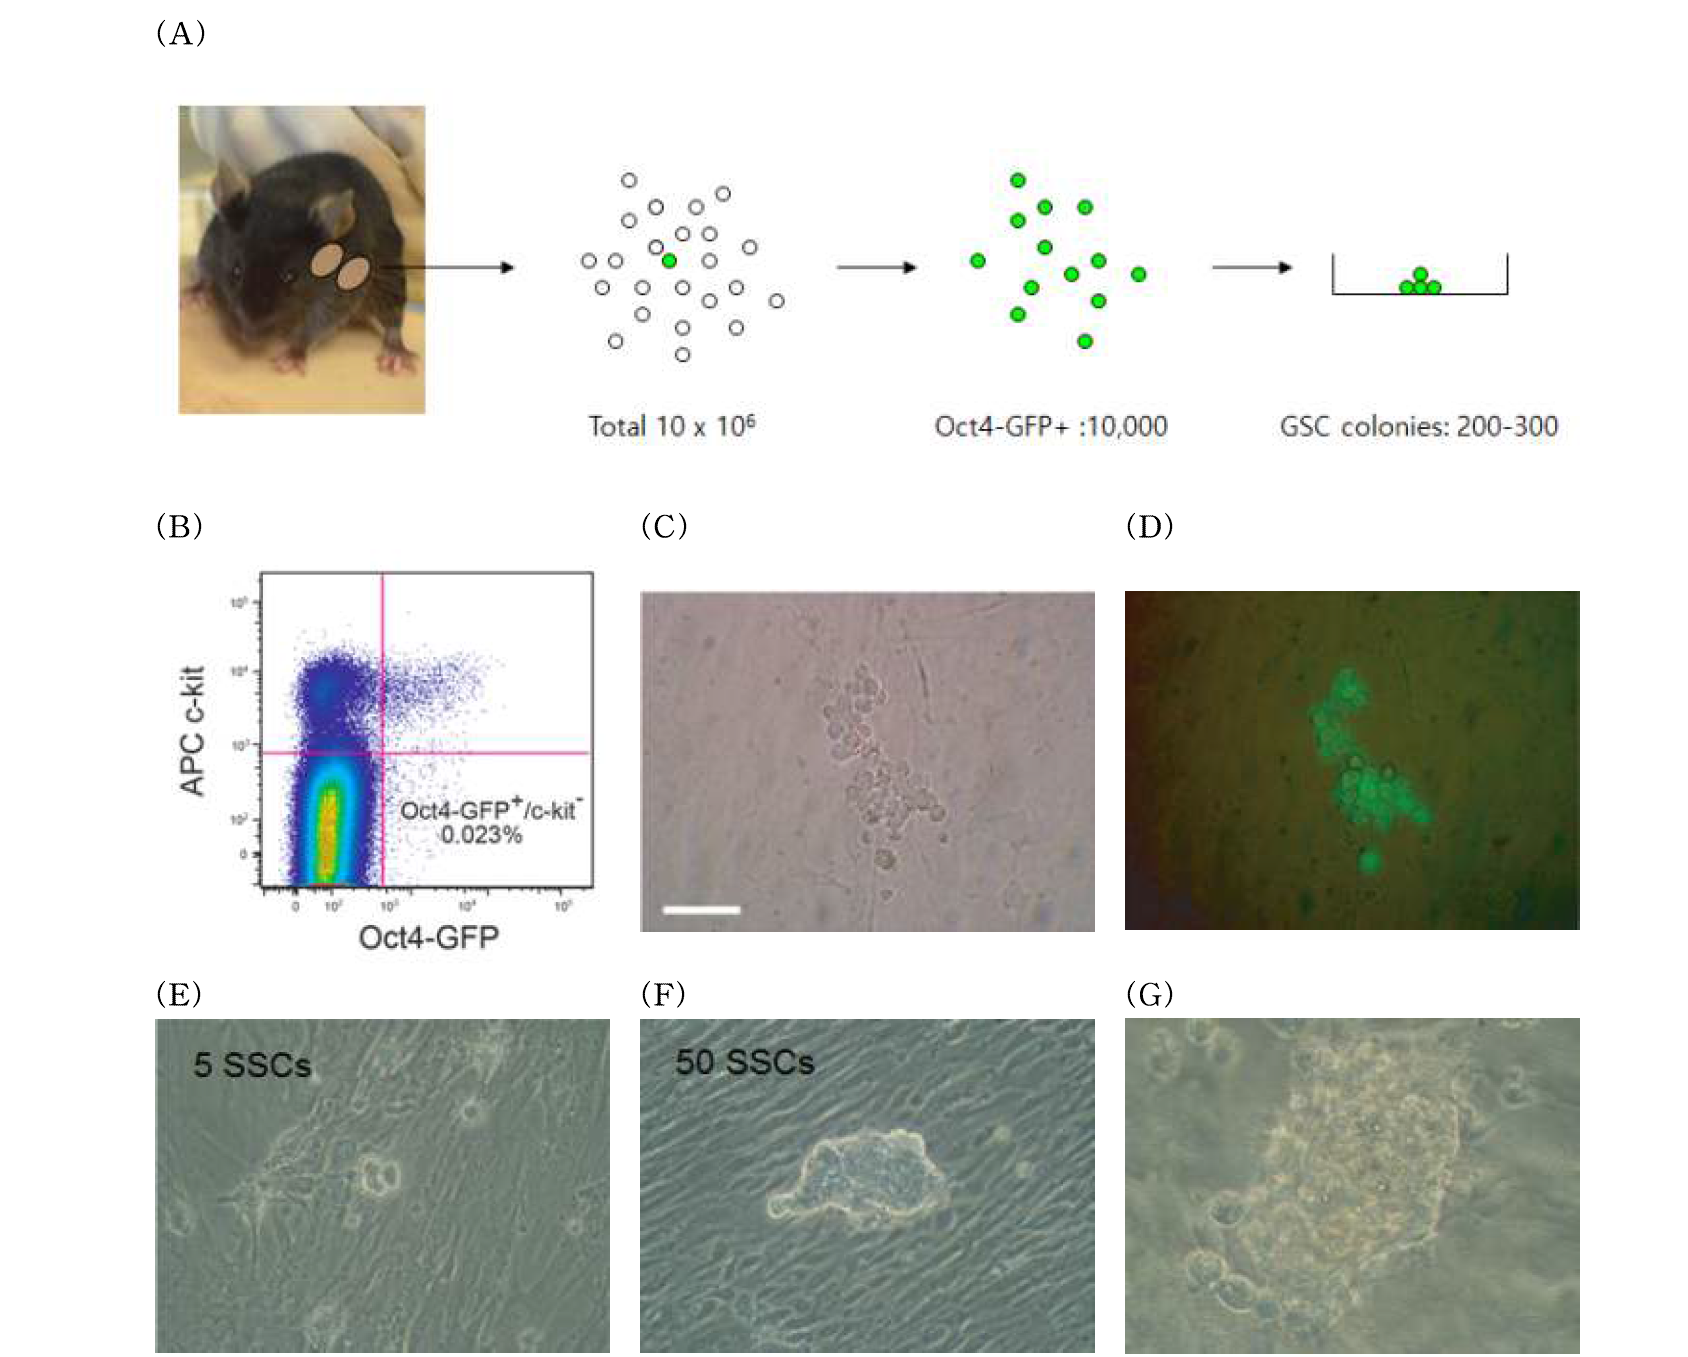 Oct4-GFP 발현 및 c-kit 염색의FACS(Fluotrscence-activated cell sorting) plot 및 생식줄기세포 형태